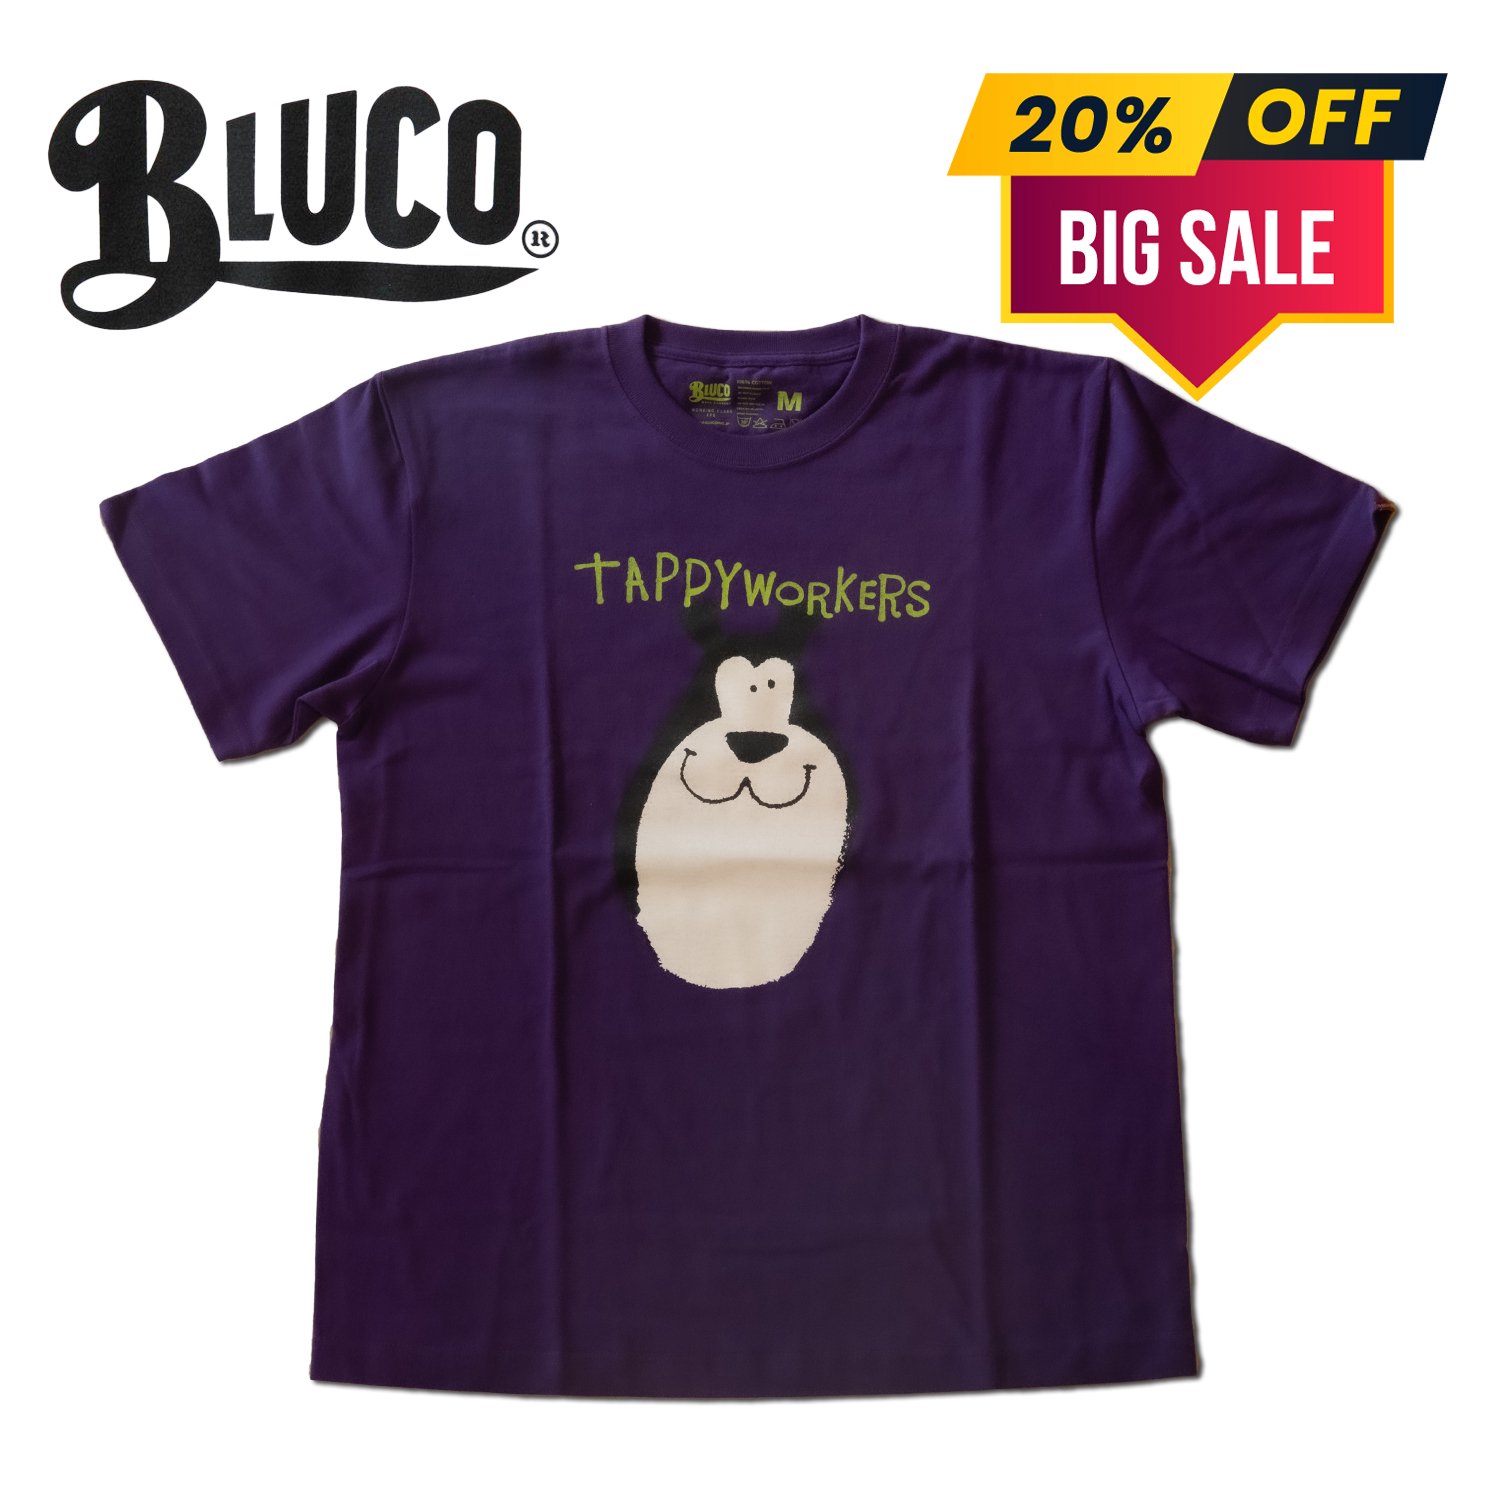 <img class='new_mark_img1' src='https://img.shop-pro.jp/img/new/icons16.gif' style='border:none;display:inline;margin:0px;padding:0px;width:auto;' />TAPPY WORKERS × BLUCO T-shirt (PURPLE / 2サイズ)